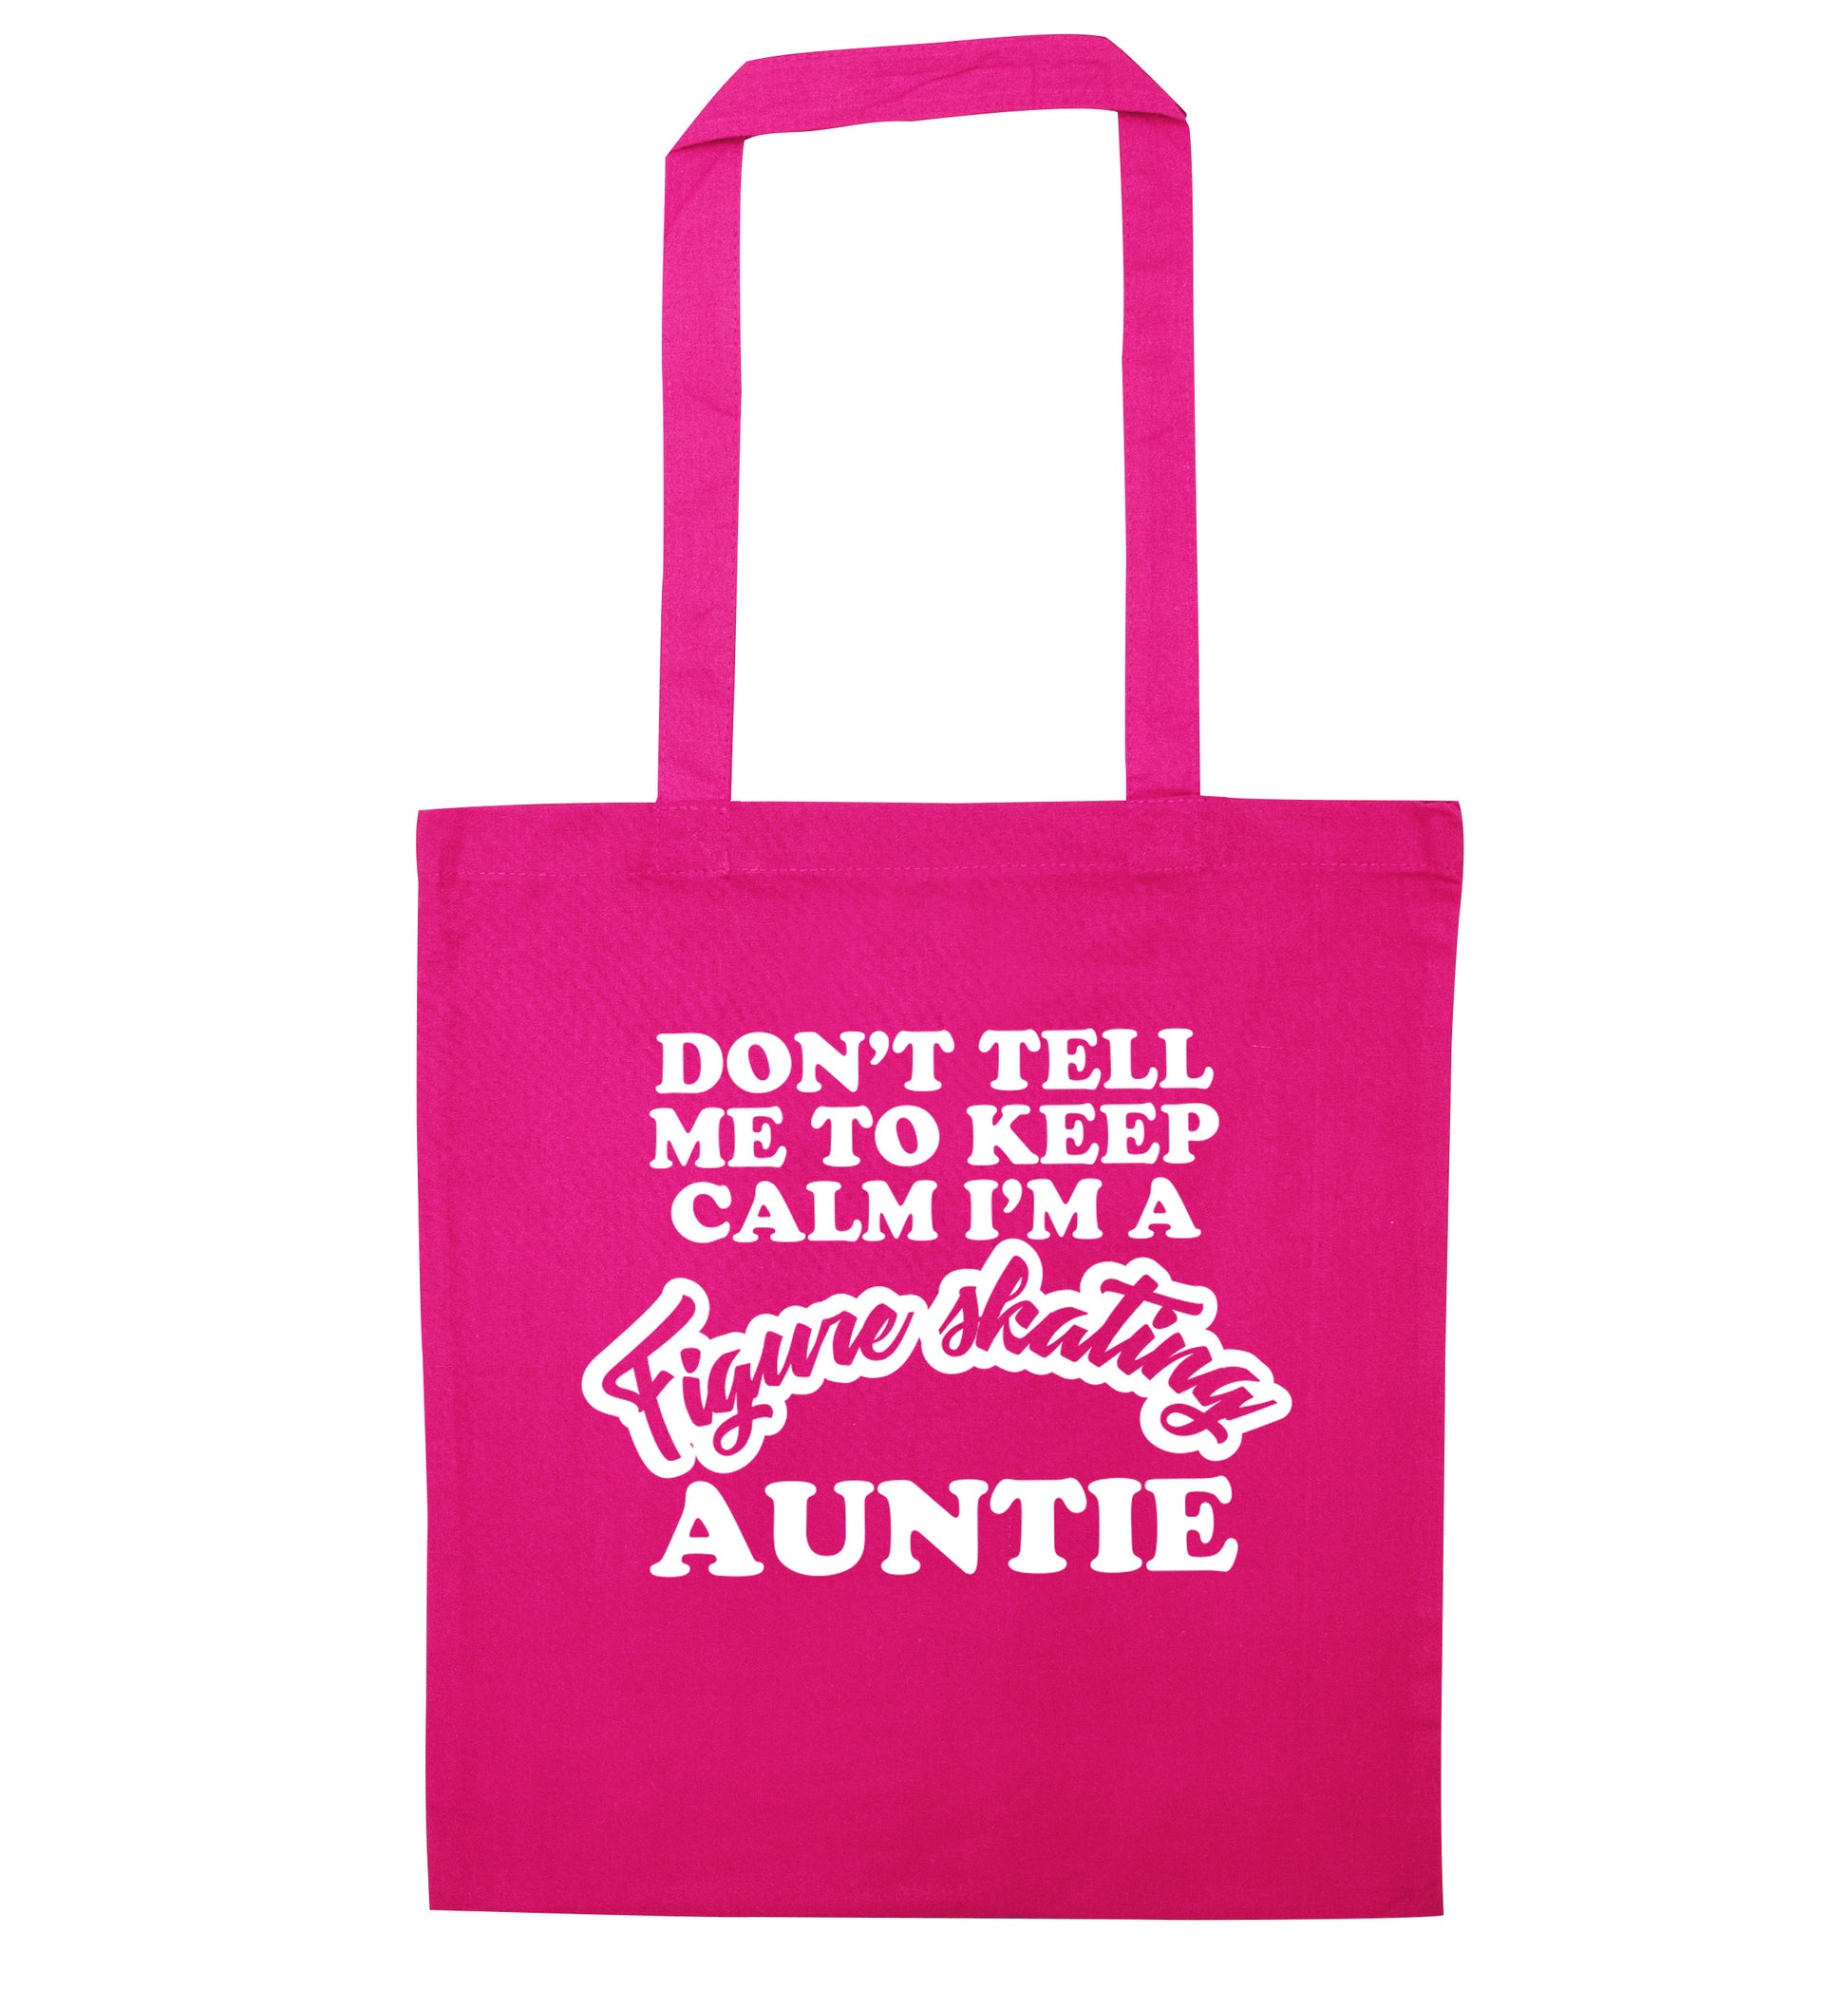 Don't tell me to keep calm I'm a figure skating auntie pink tote bag